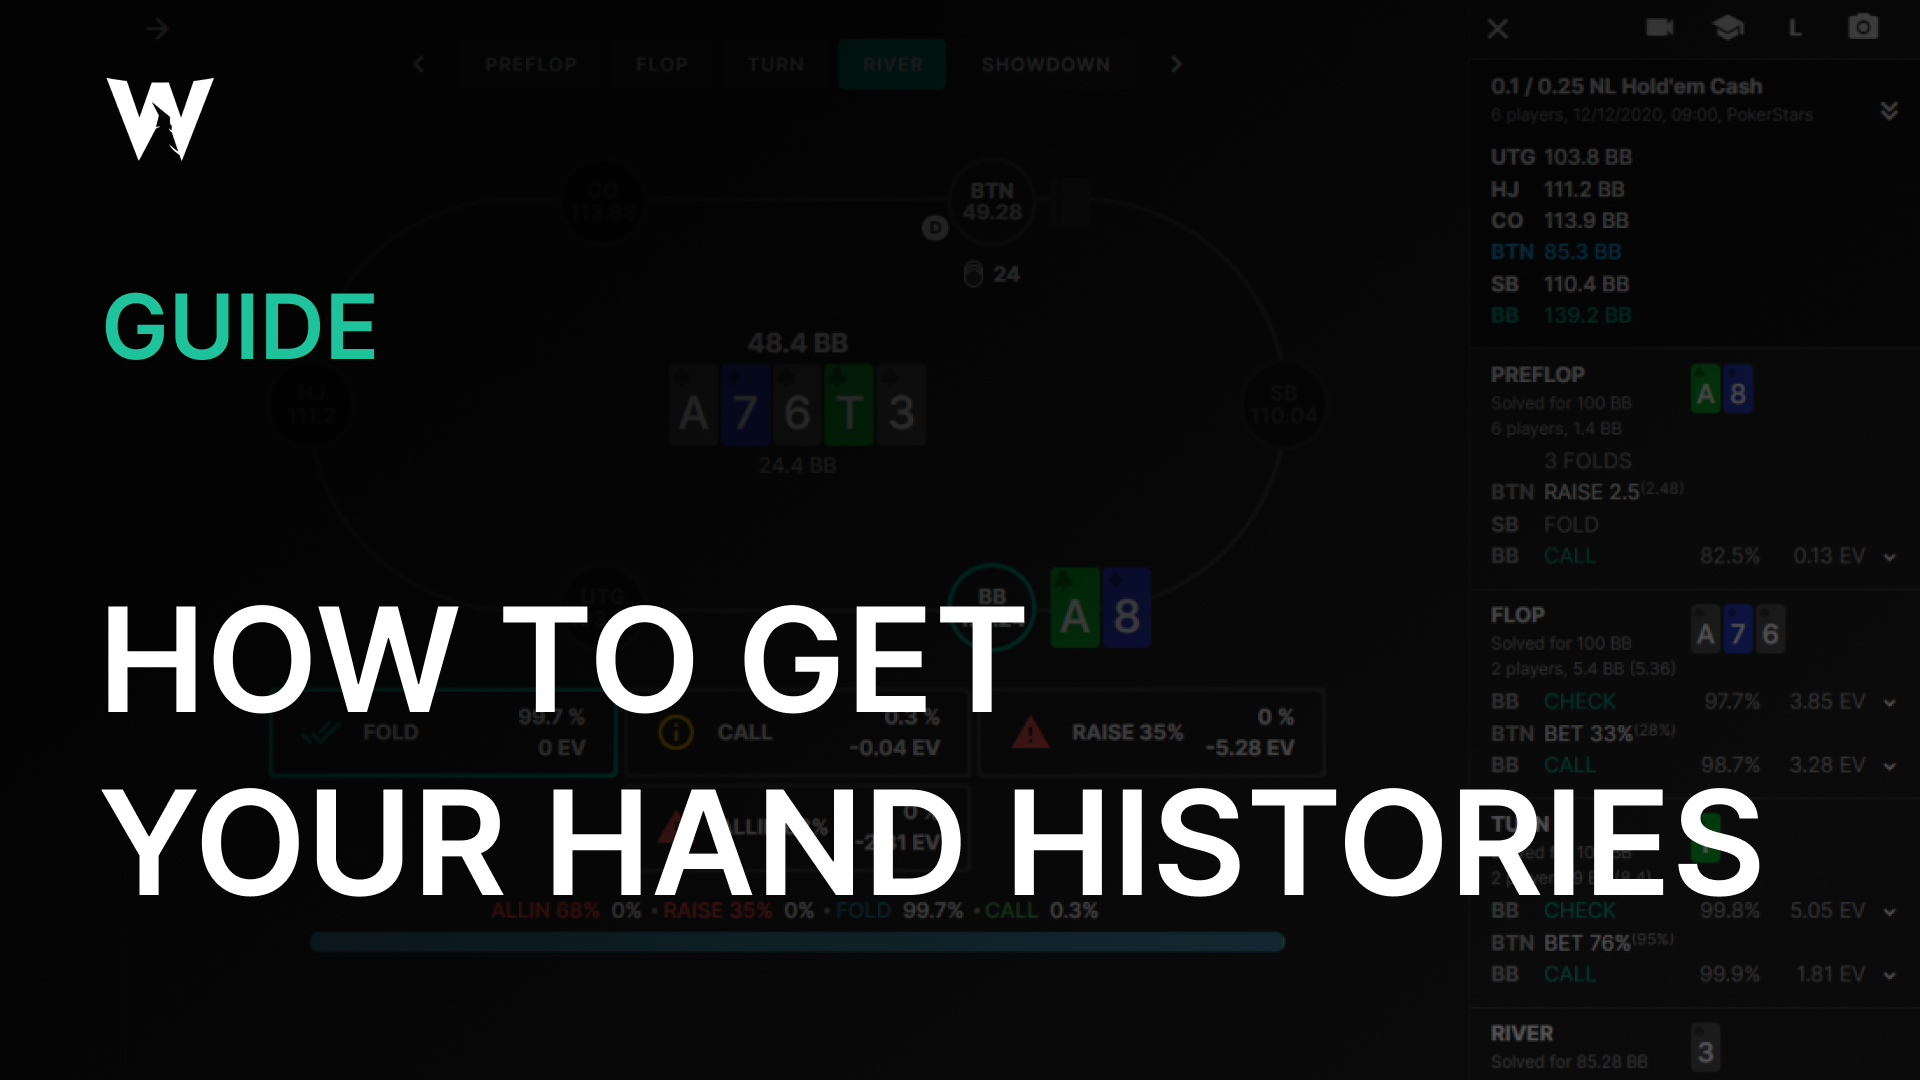 How to get your hand histories